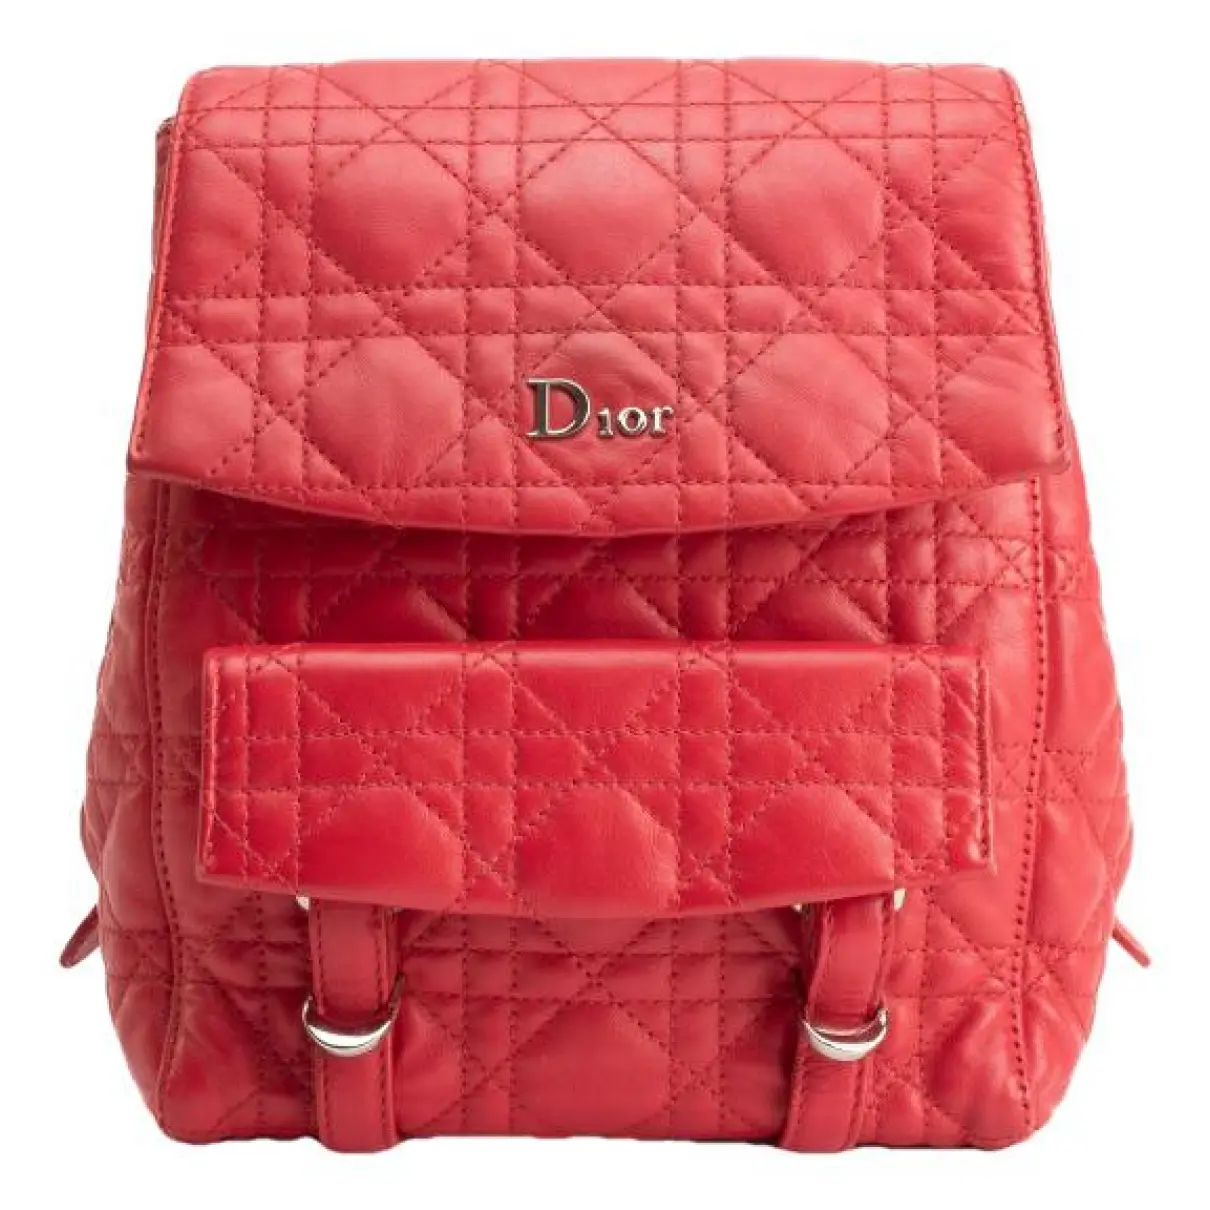 DiorTravel leather backpack